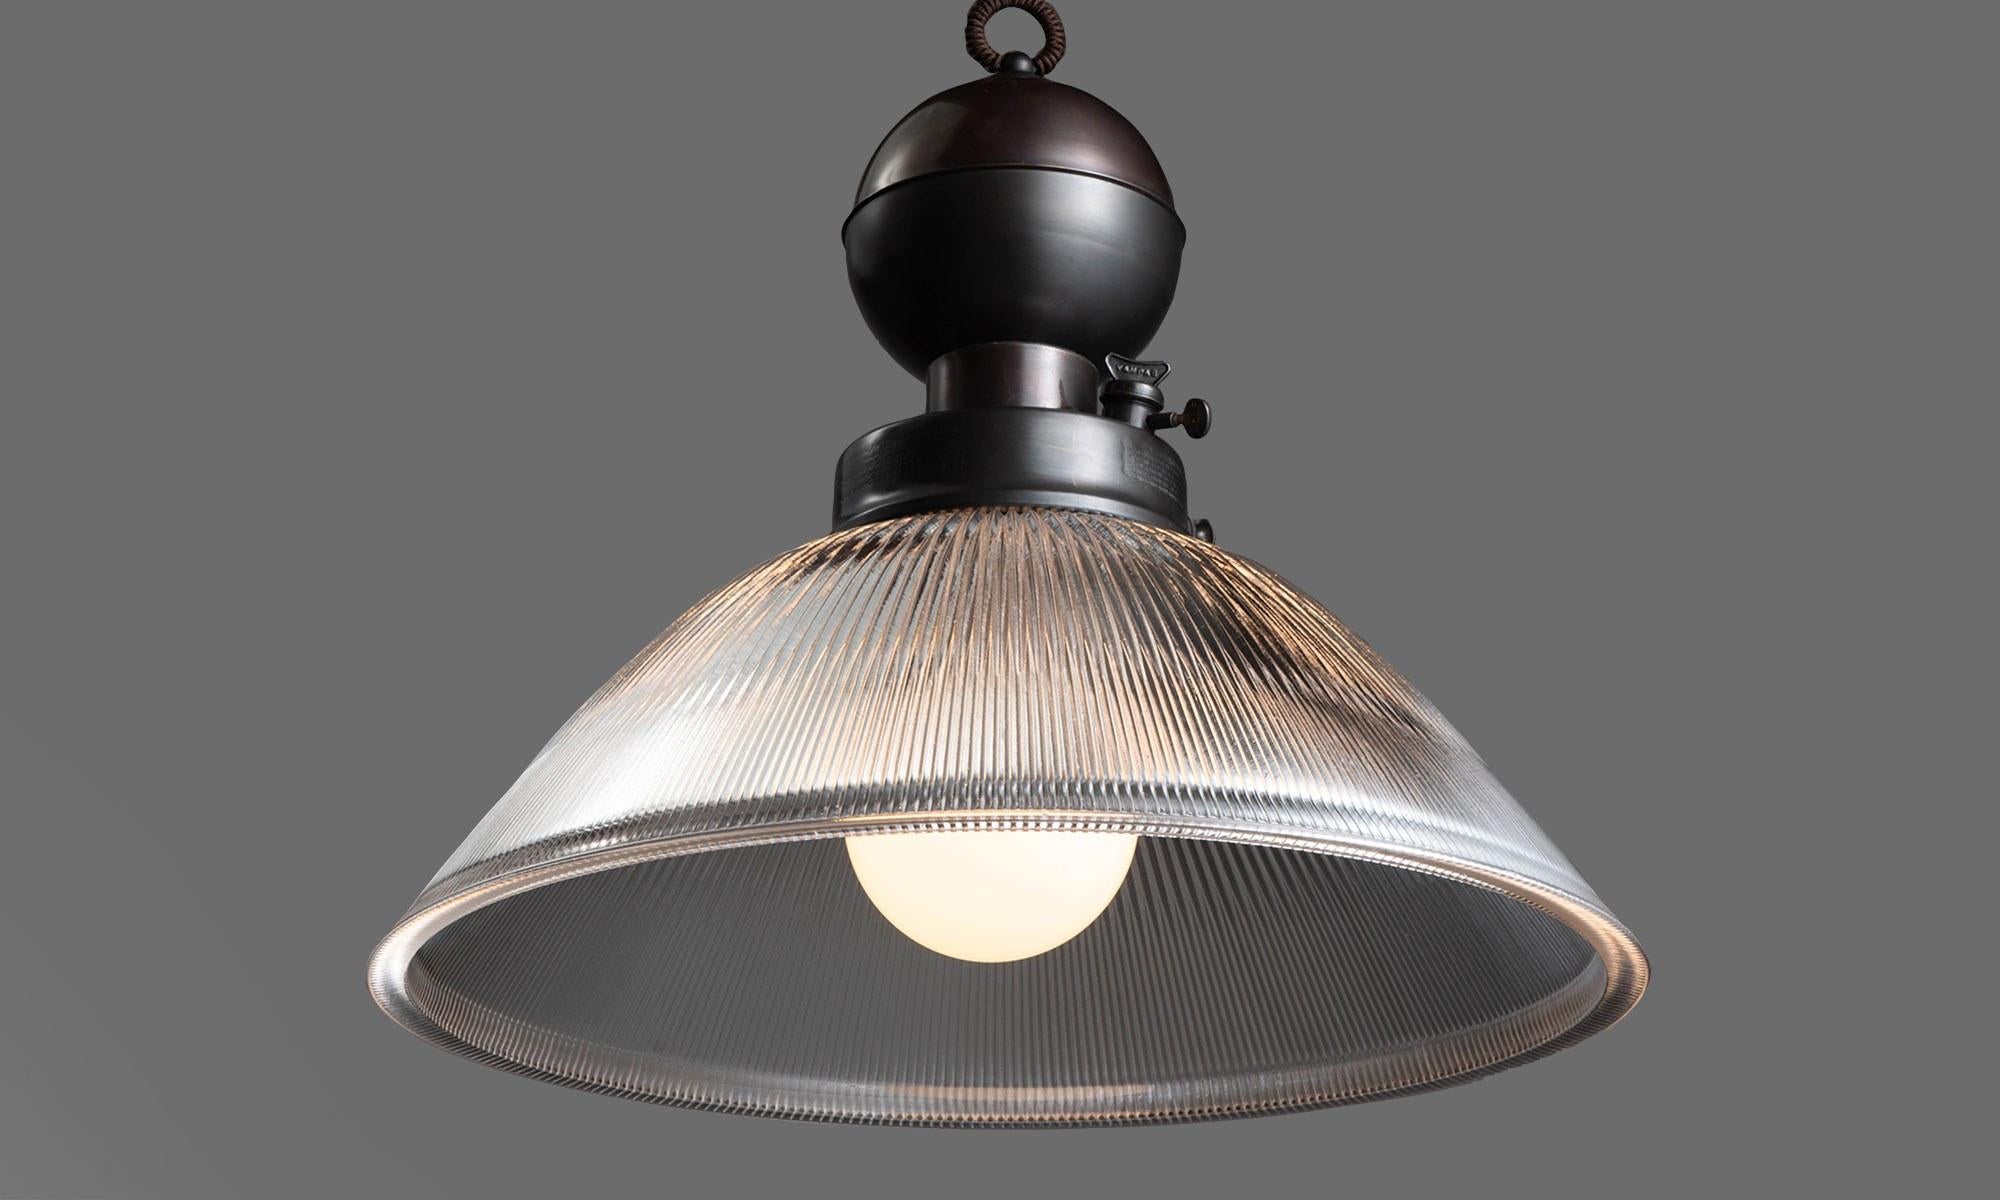 Industrial glass and brass gas lamp pendant, Italy, 21st century.

In the style of an Industrial gas lamp pendant, converted to electric.

*Please Note: This fixture is made in Italy, and comes newly wired (eu wiring). It is not UL Listed. Standard